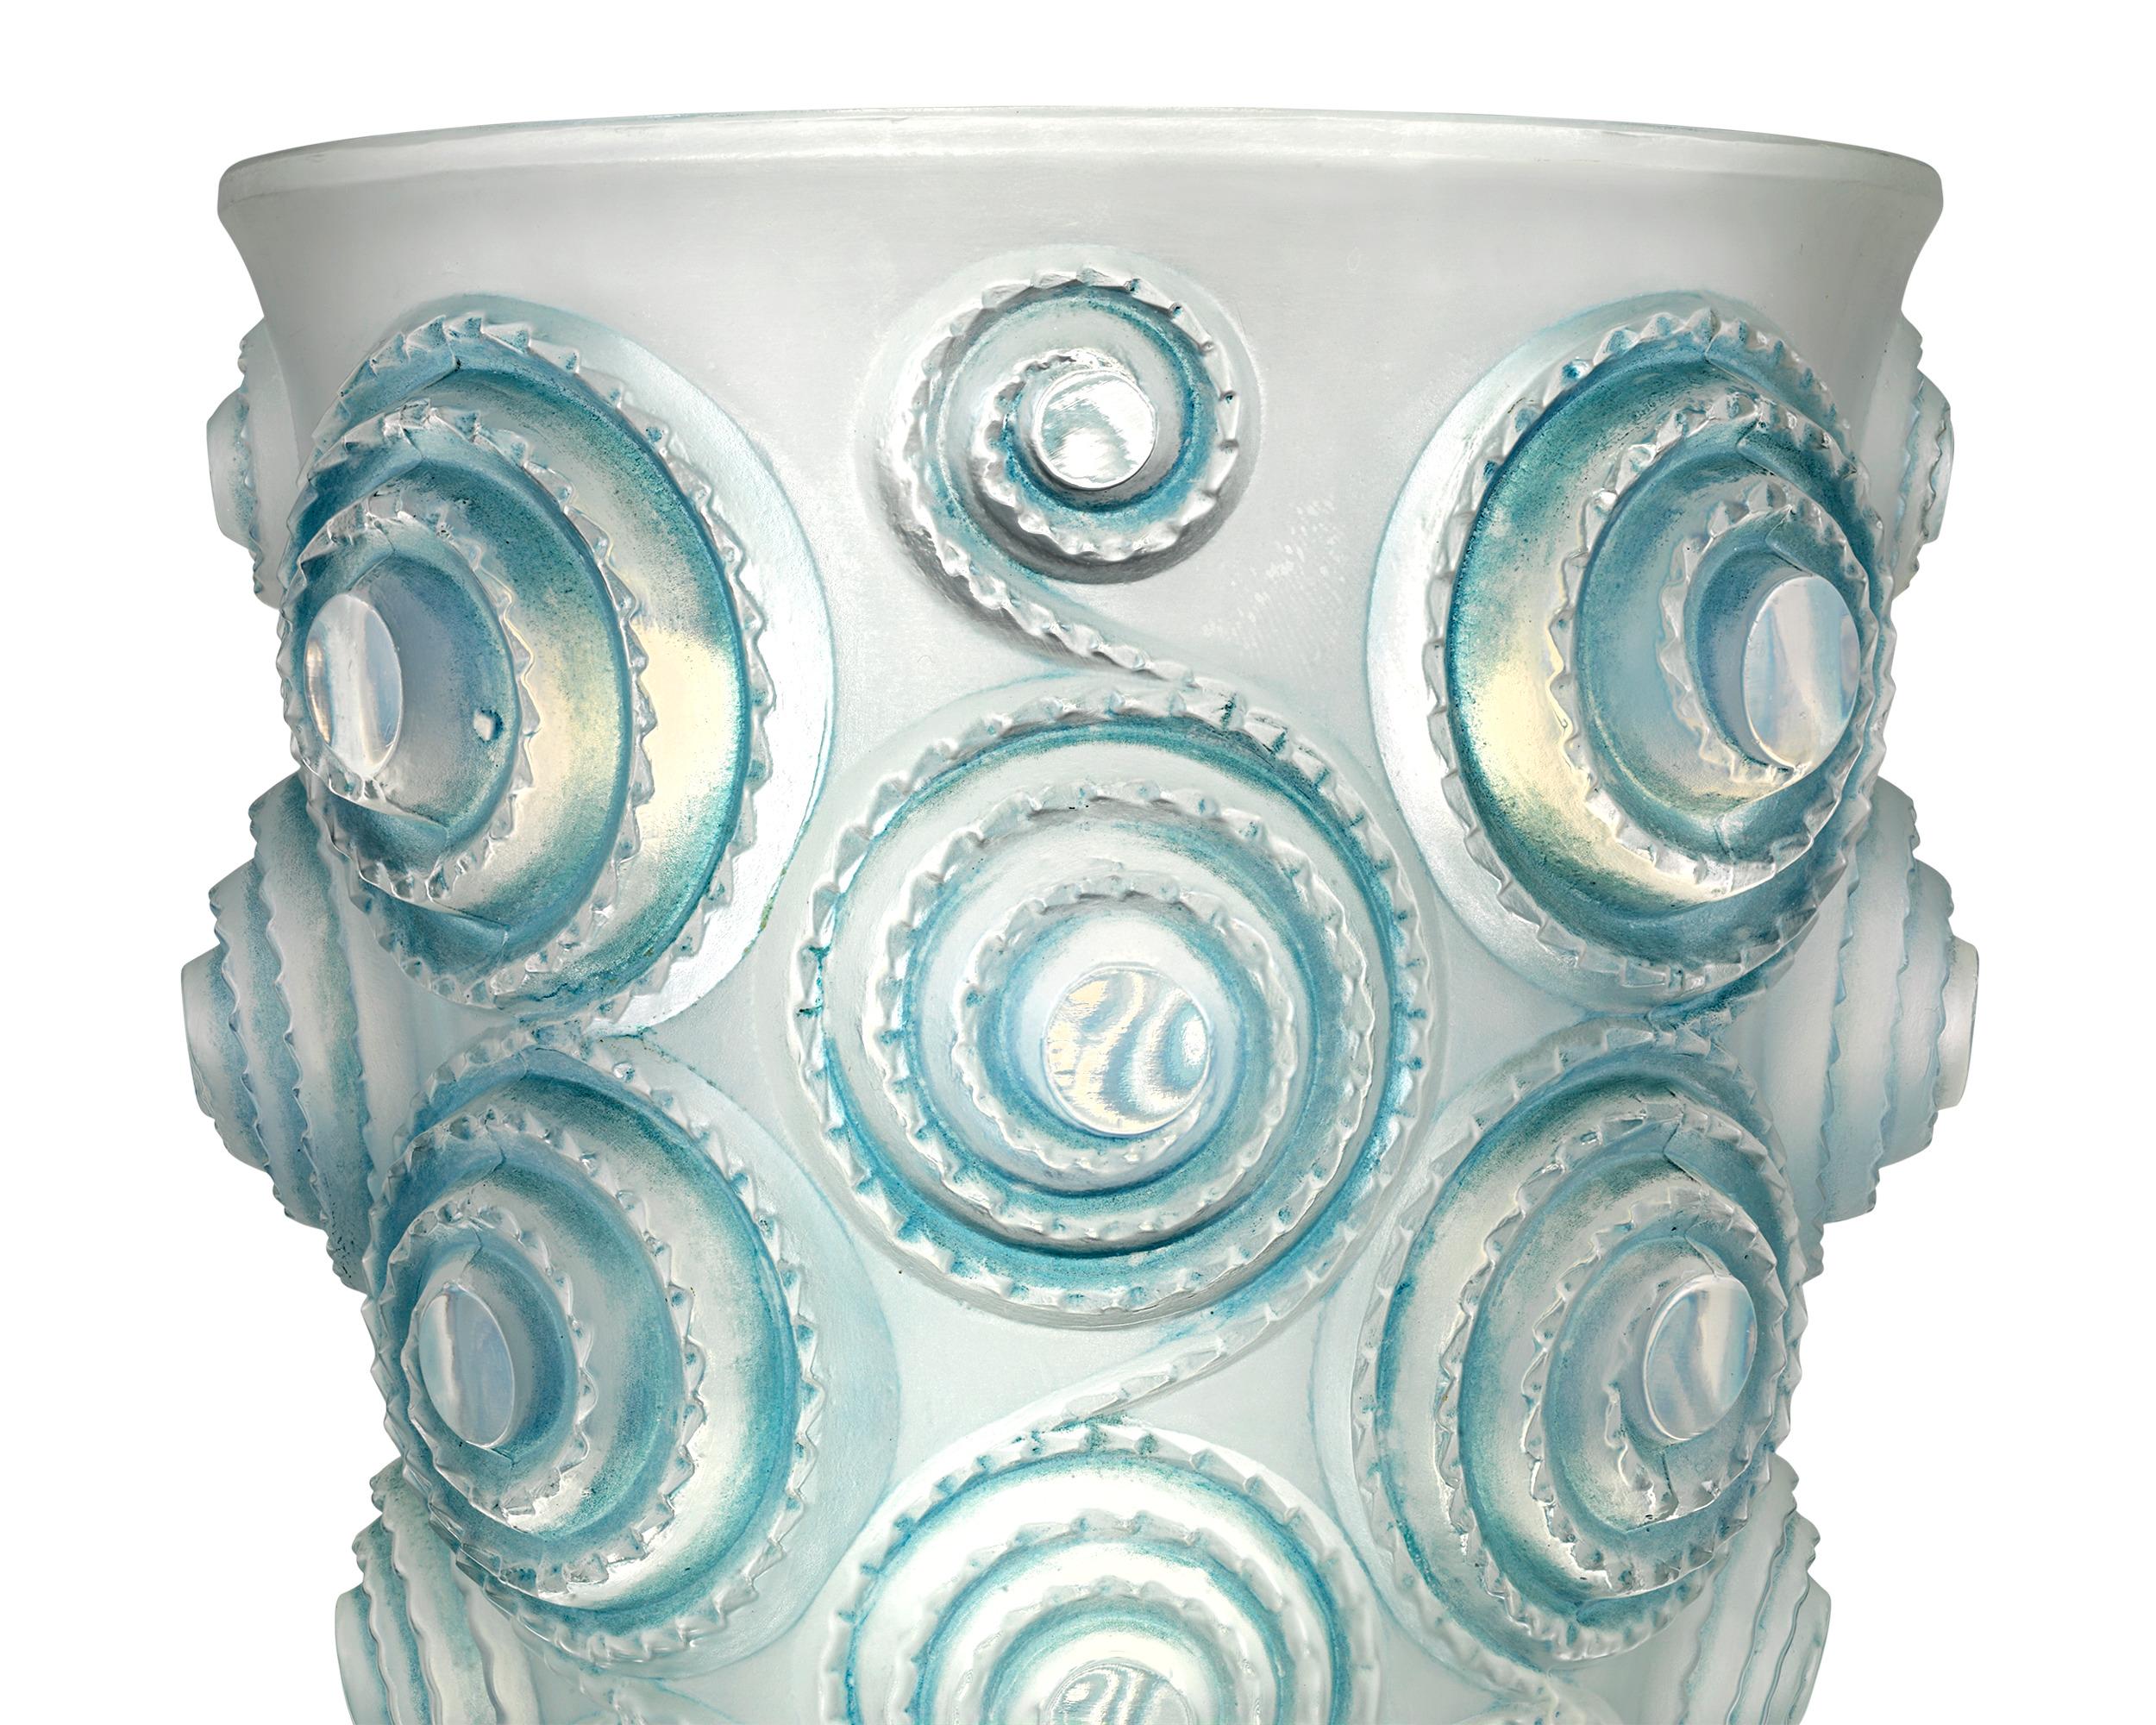 Spiraling circles are stacked atop each other to form this rare Lalique vase in the Spirales motif, first designed by René Lalique in 1930. Combining frosted and blue stained glass in high relief, this vase embodies the elegance and artistry of